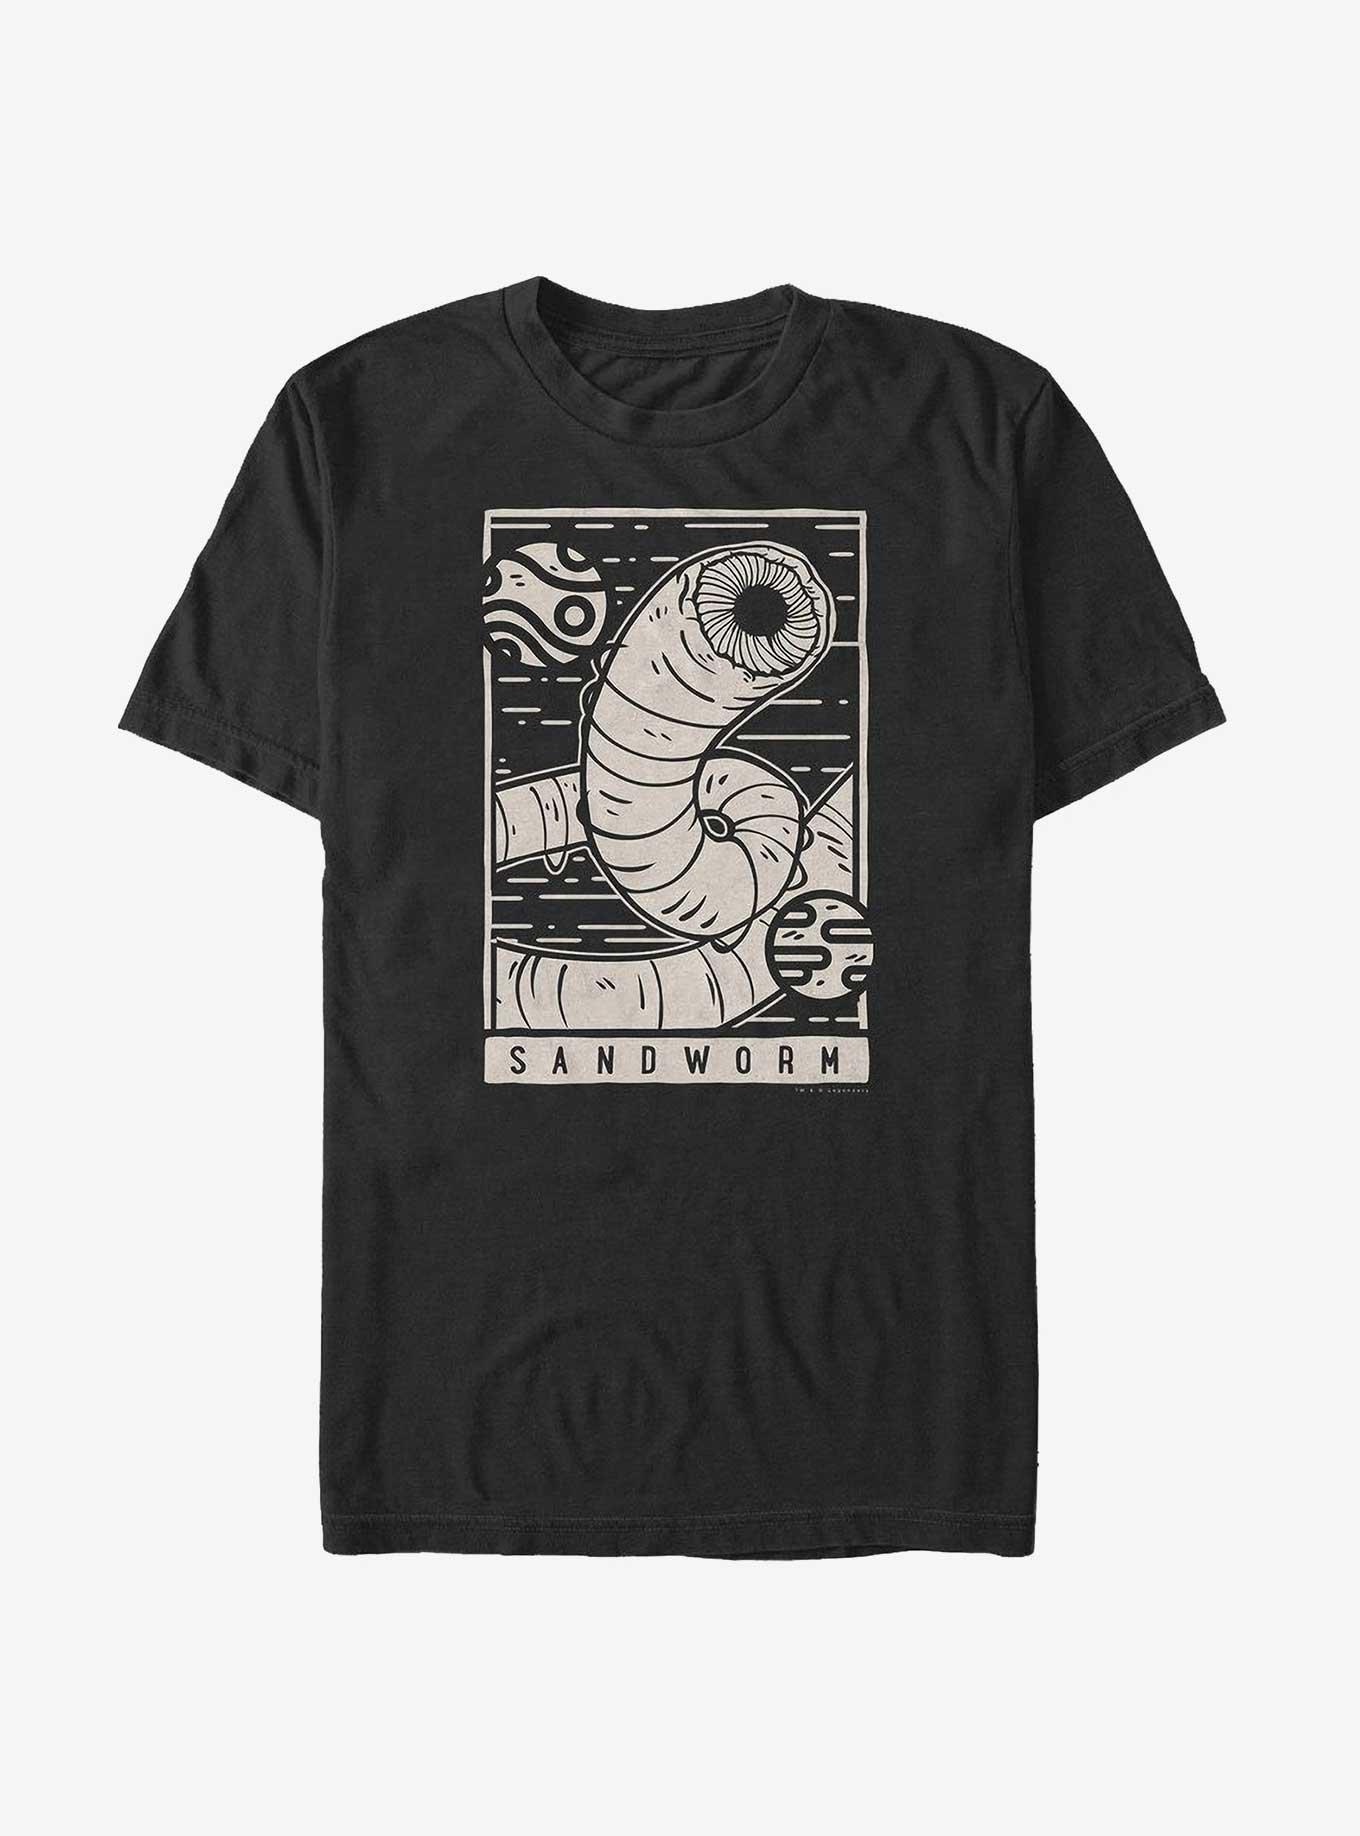 Dune: Part Two Sandworm Poster T-Shirt - BLACK | Hot Topic